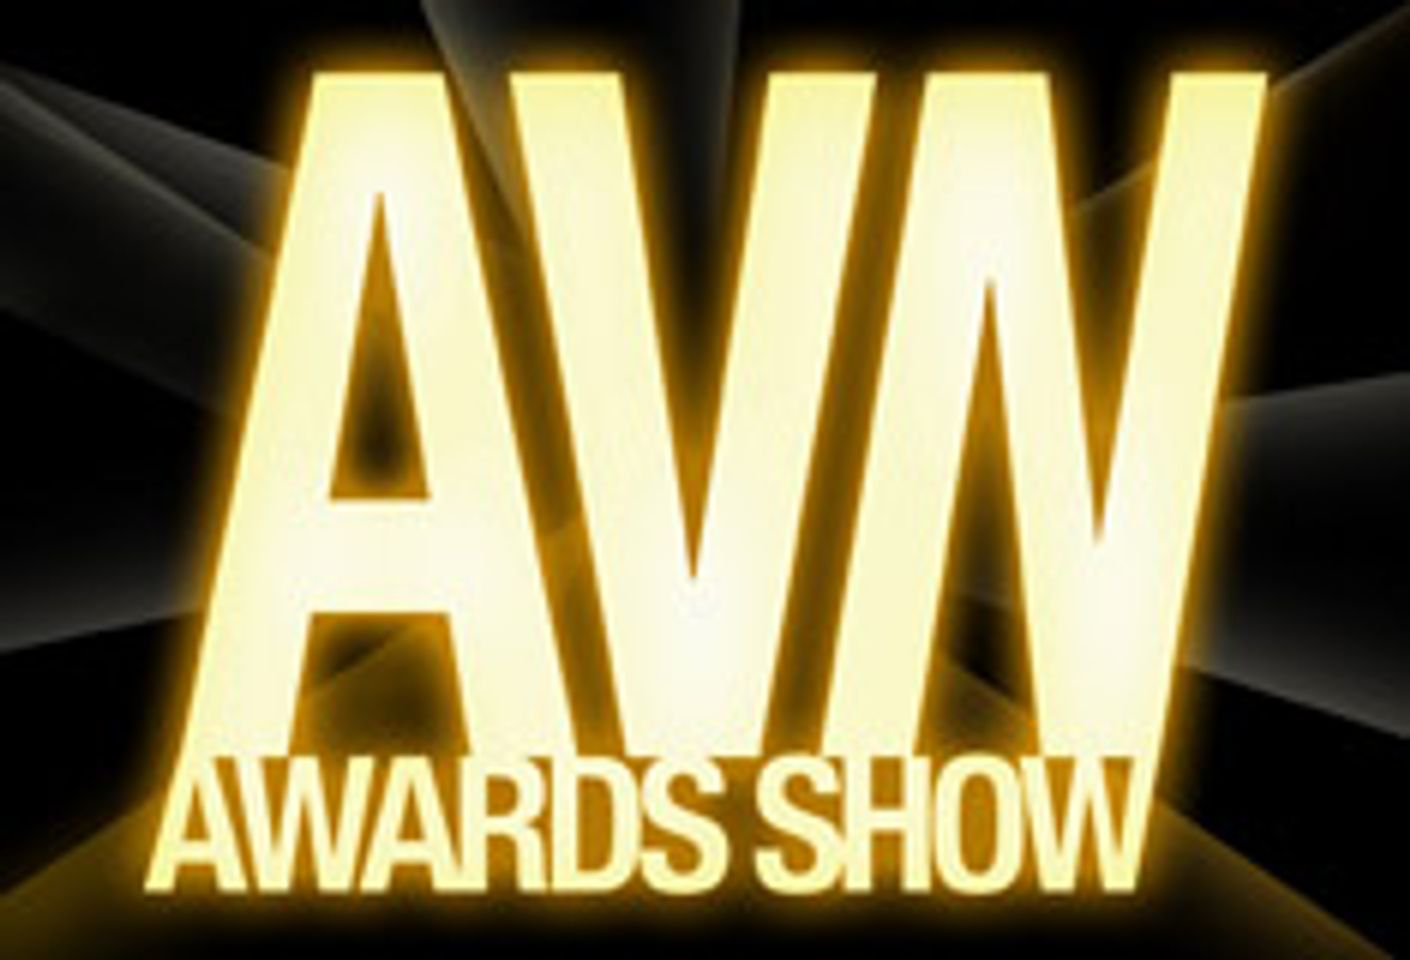 AVN Awards Pre-Show Party Coming to Olympic Garden